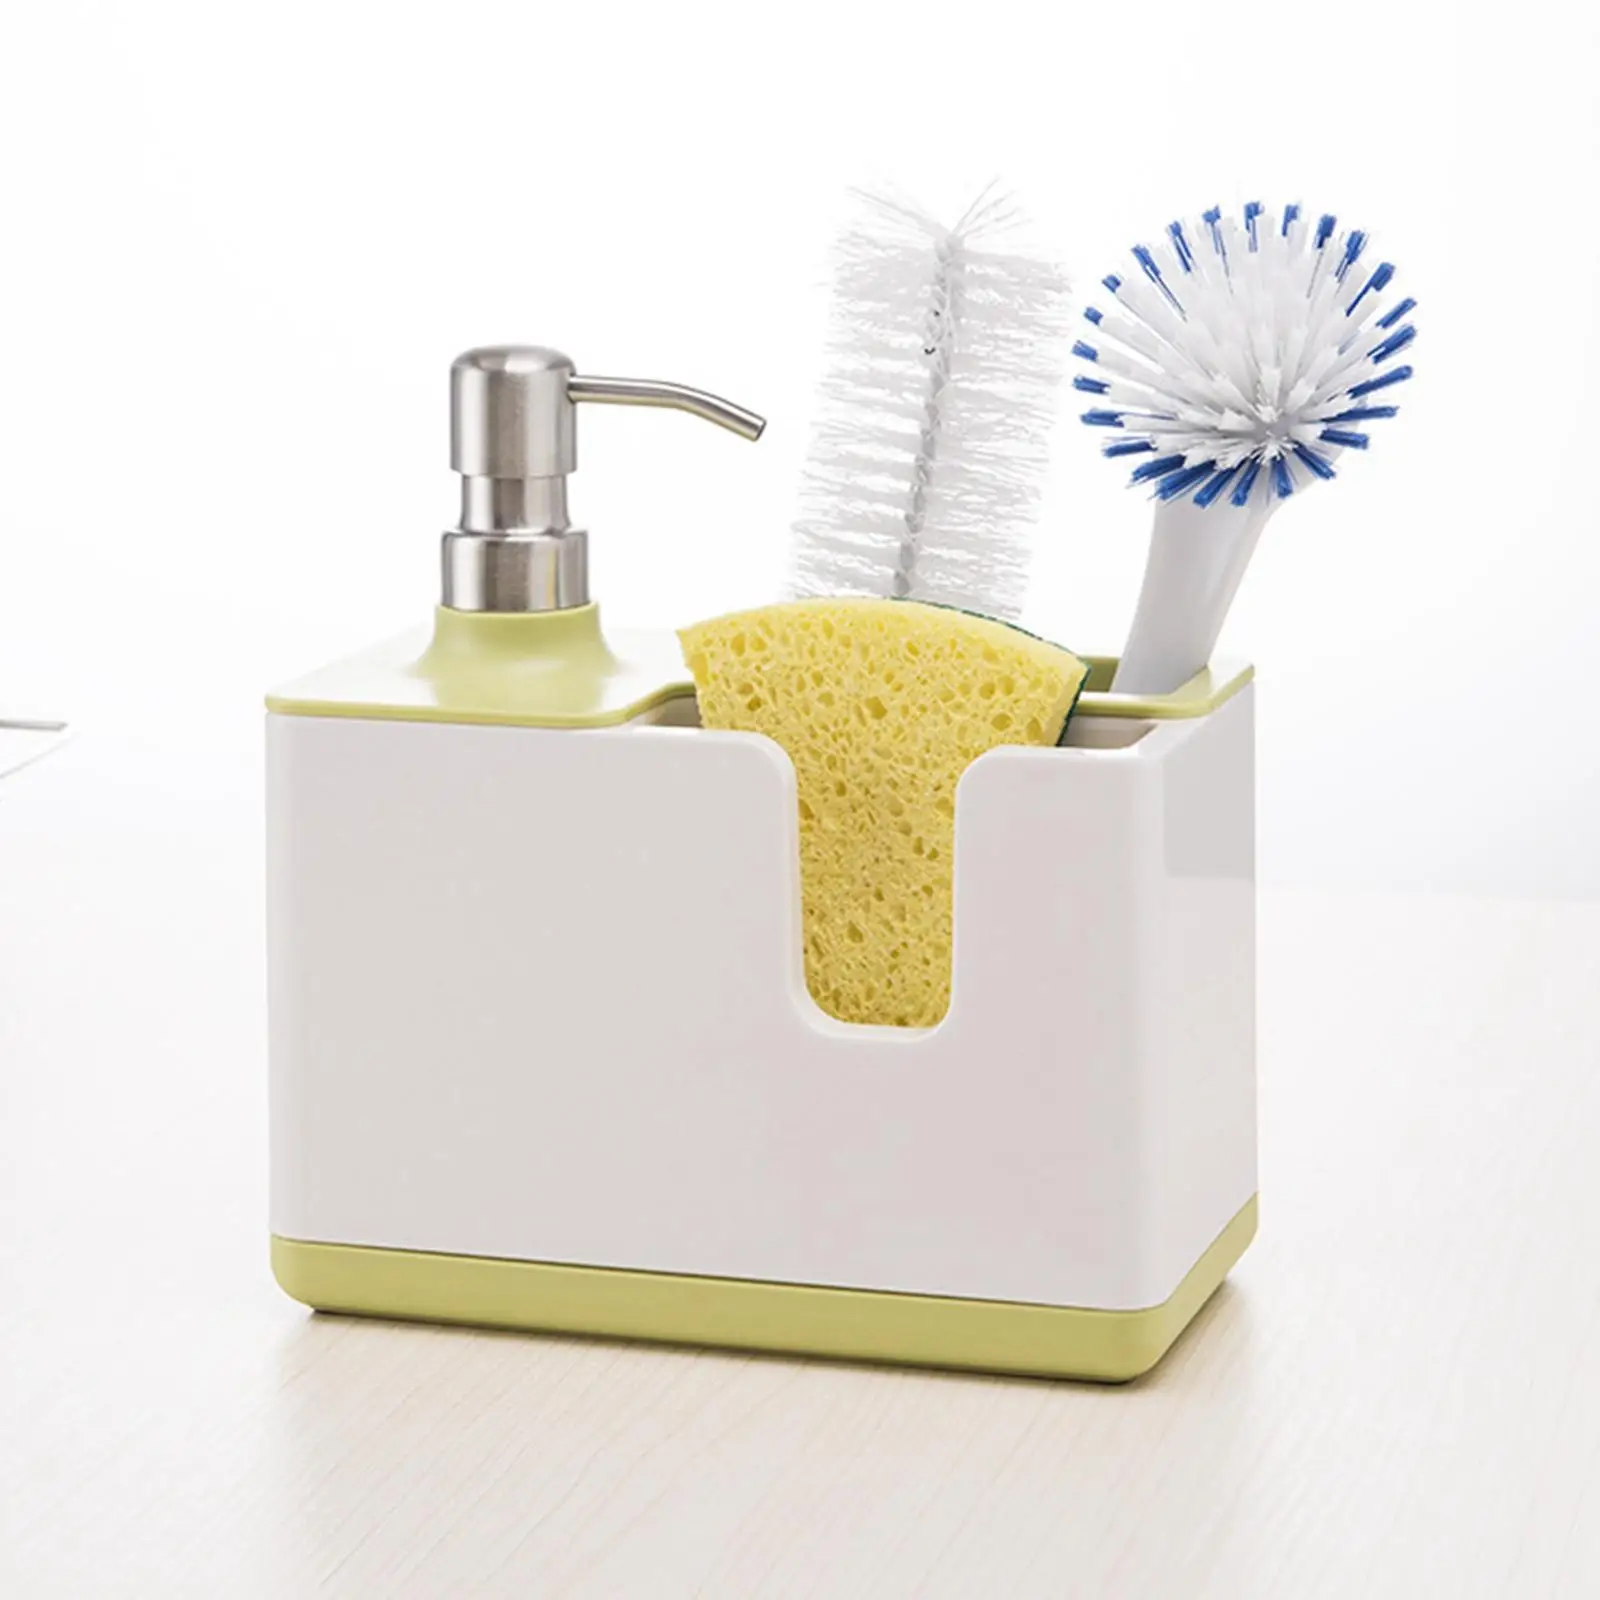 Plastic Kitchen Sink Caddy with Soap Dispenser Pump for Brushes Countertop